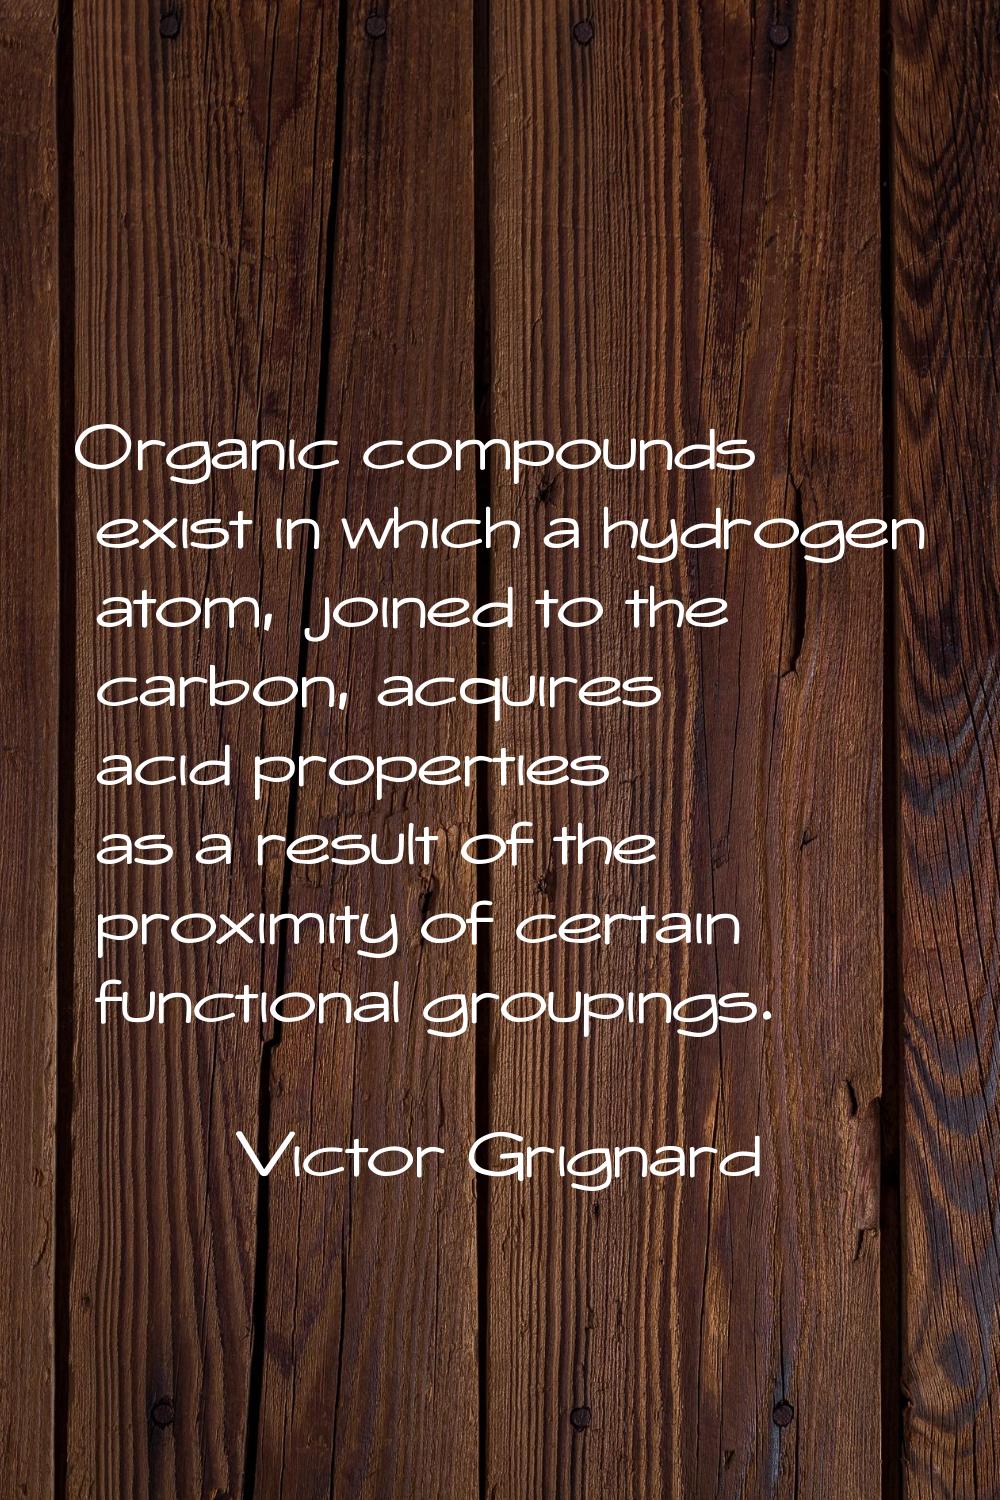 Organic compounds exist in which a hydrogen atom, joined to the carbon, acquires acid properties as